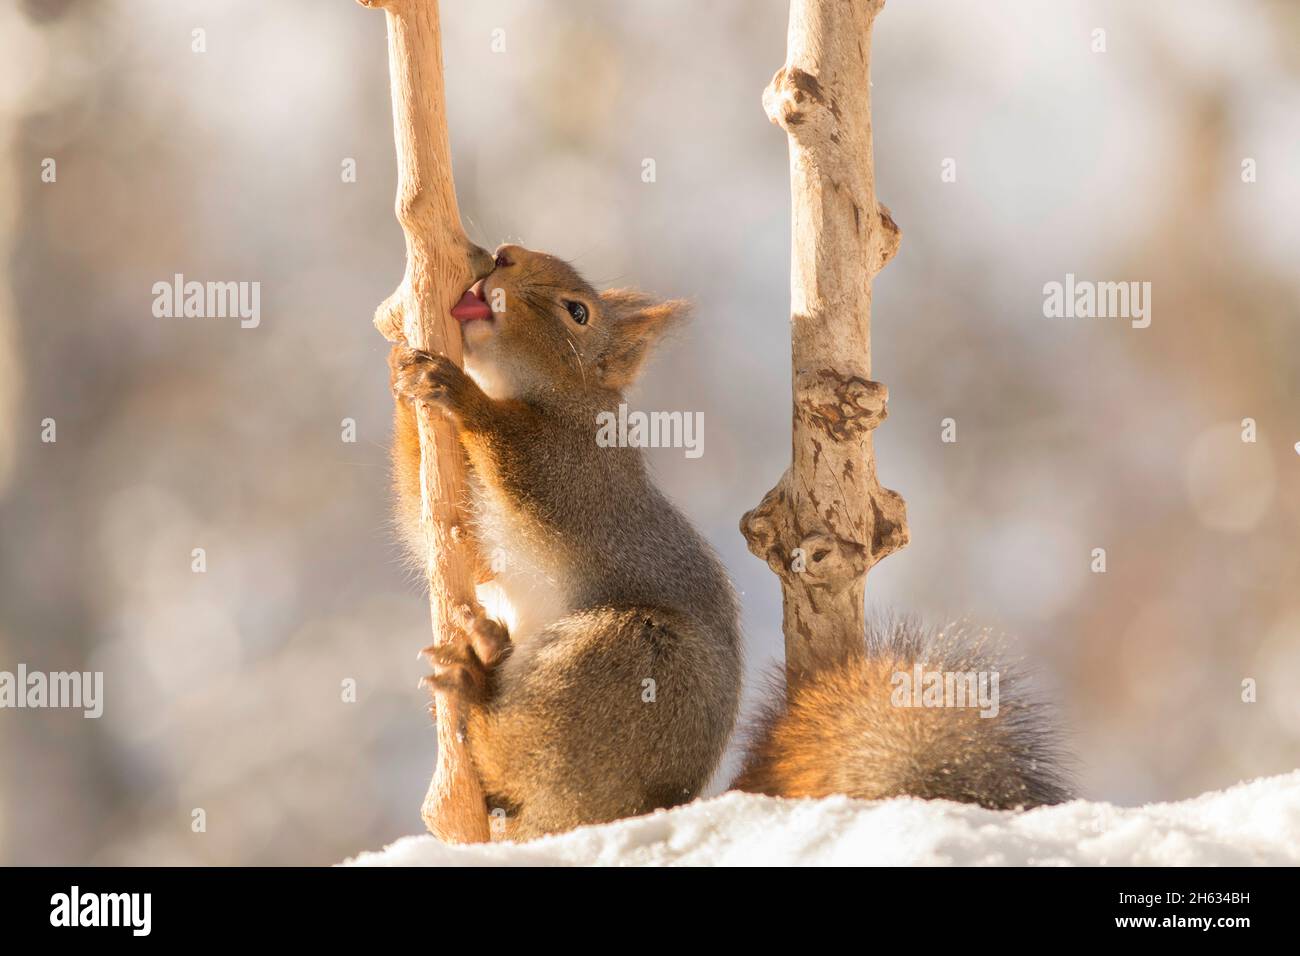 close up of red squirrel holding and licking a branch with snow beneath Stock Photo